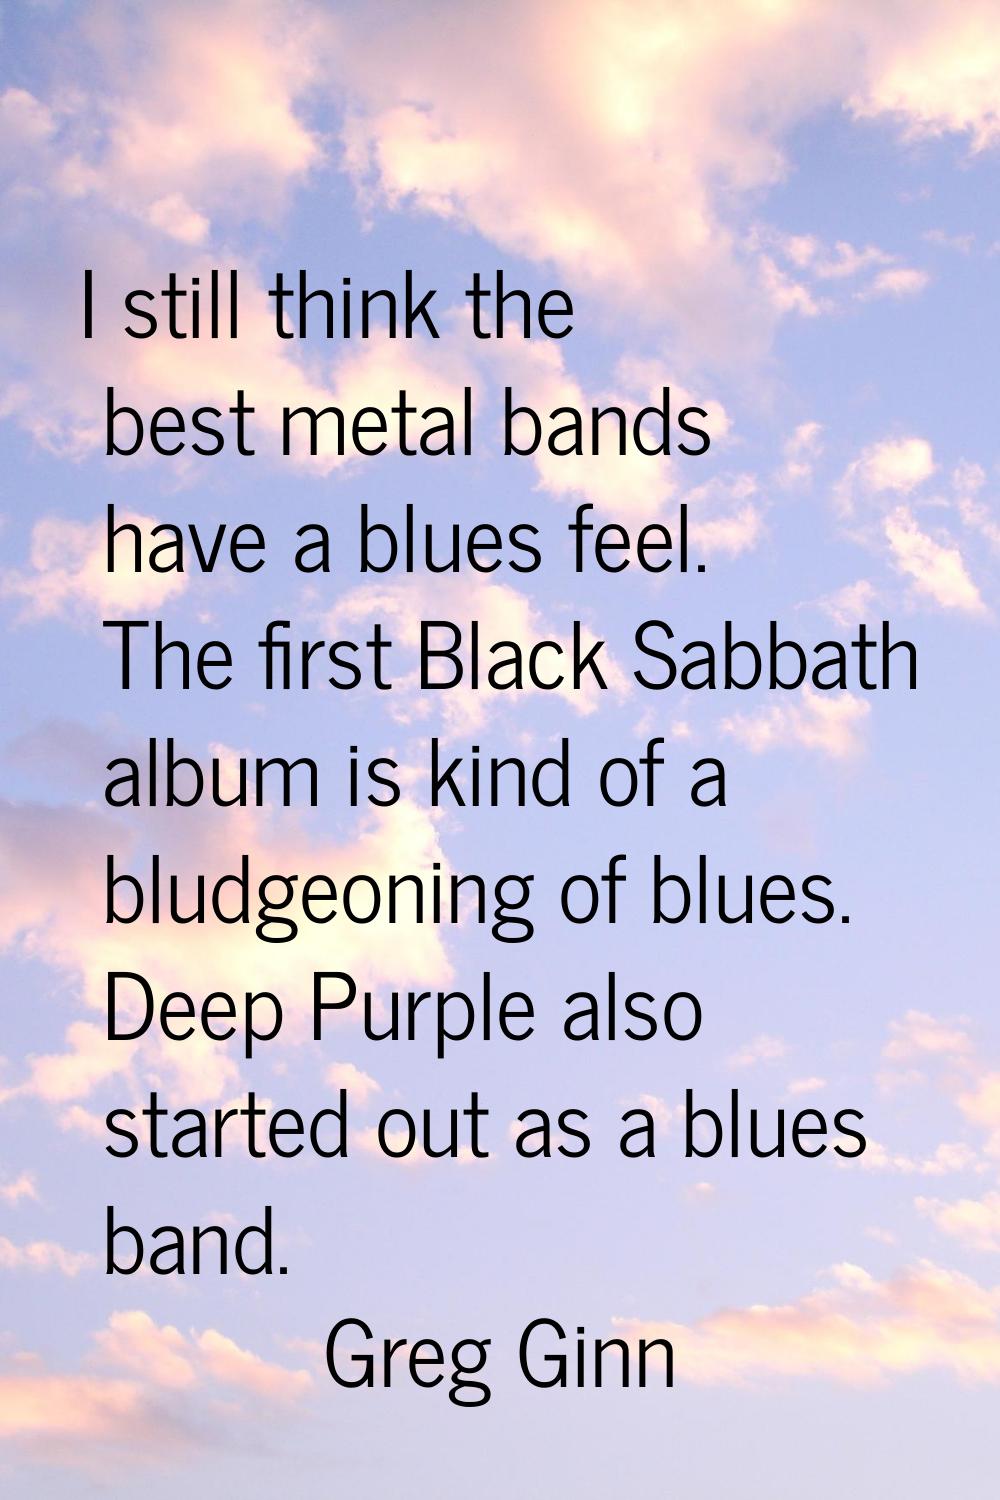 I still think the best metal bands have a blues feel. The first Black Sabbath album is kind of a bl